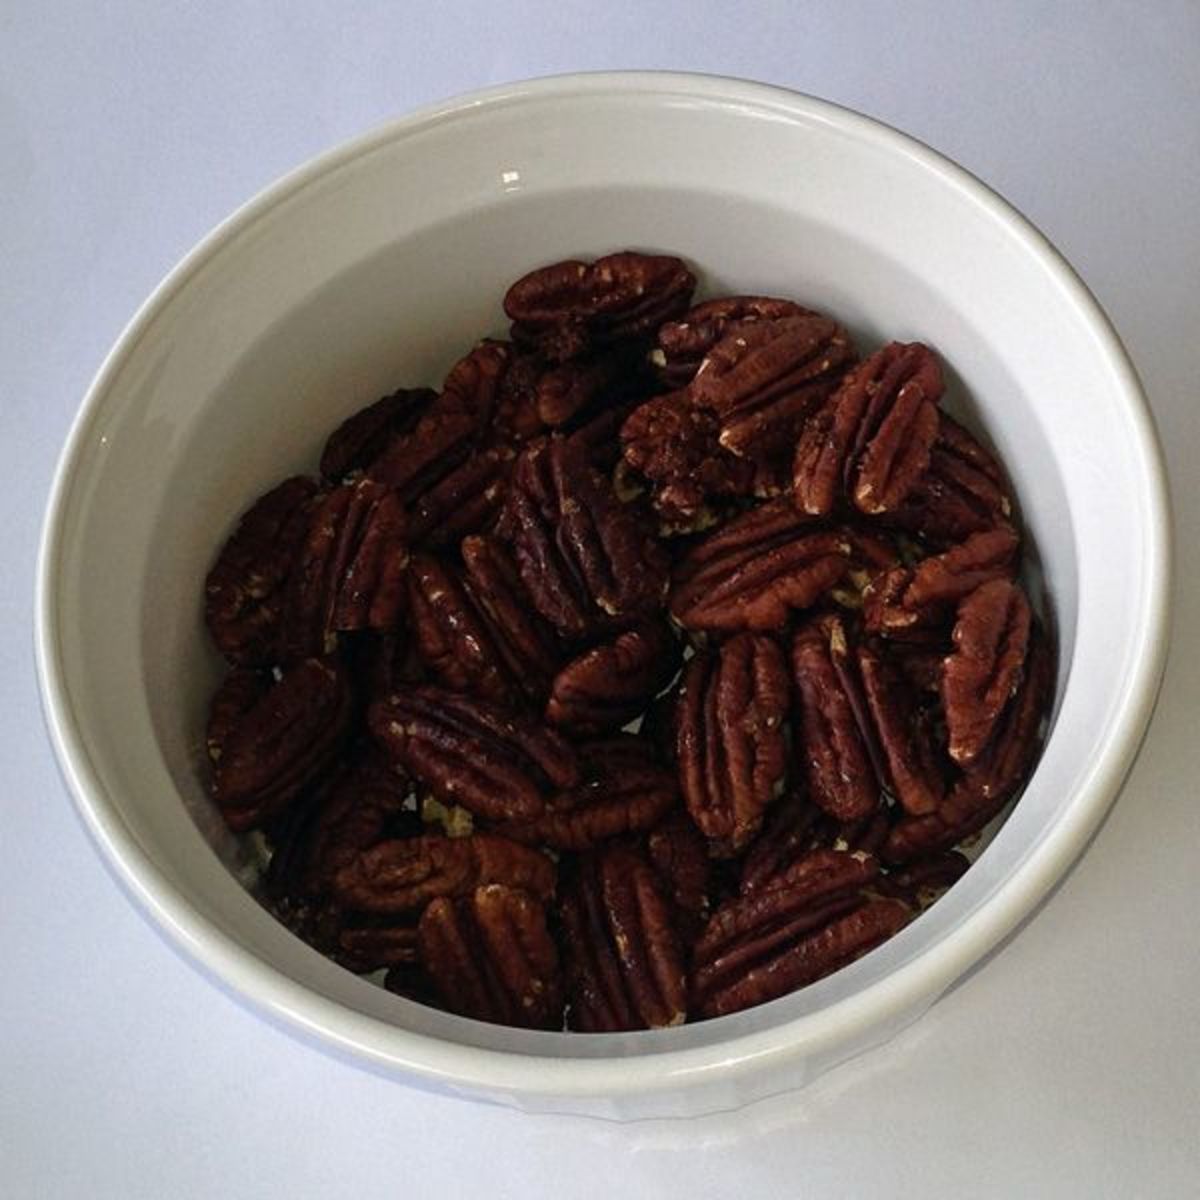 my-healthier-candied-pecans-or-candied-walnuts-recipe